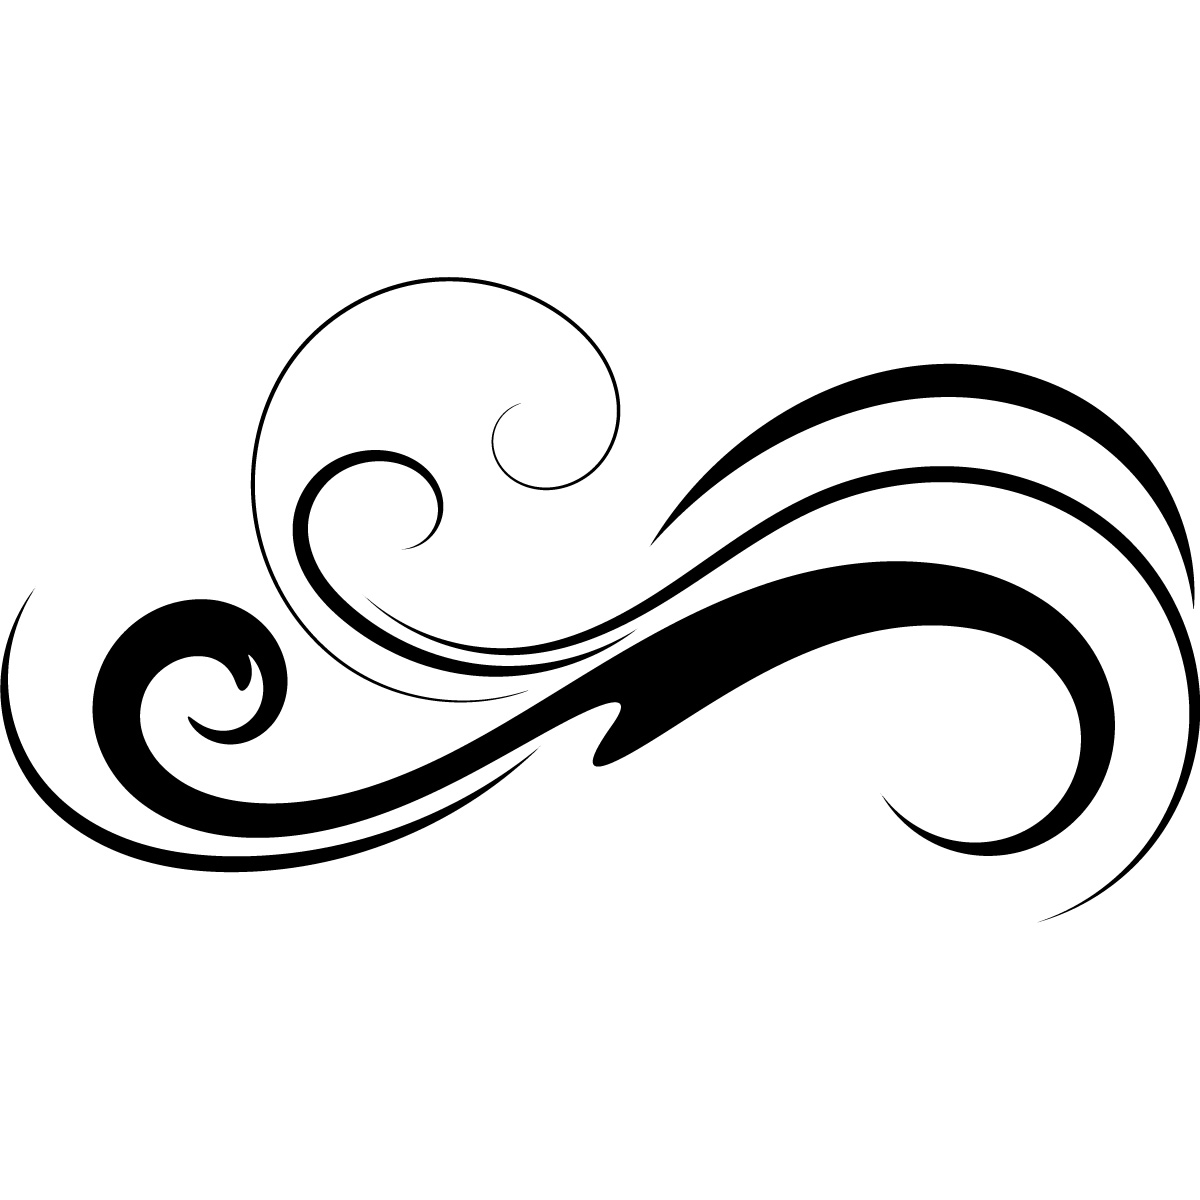 Water Waves Clipart Black And White | Clipart Panda - Free Clipart ...